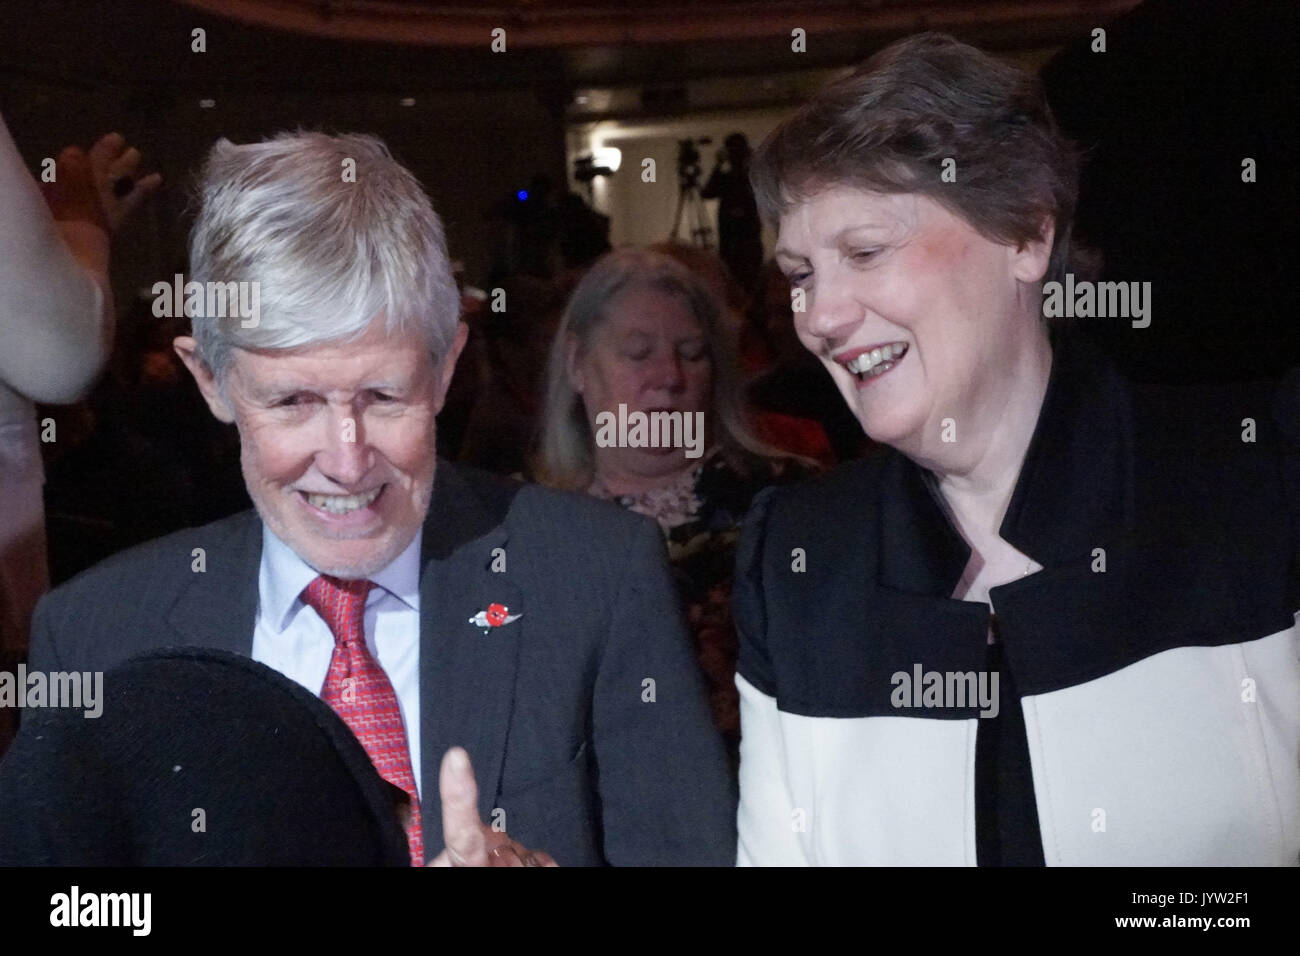 Auckland, New Zealand. 20th Aug, 2017. Former Prime Minister Helen Clark (R) with her husband Peter Davis (L) attend the Labour Party's official campaign launch at Auckland Town Hall, New Zealand on Aug 20, 20172017 New Zealand general election is scheduled to be held on 23 September 2017 . The current government is National Party. Credit: Shirley Kwok/Pacific Press/Alamy Live News Stock Photo